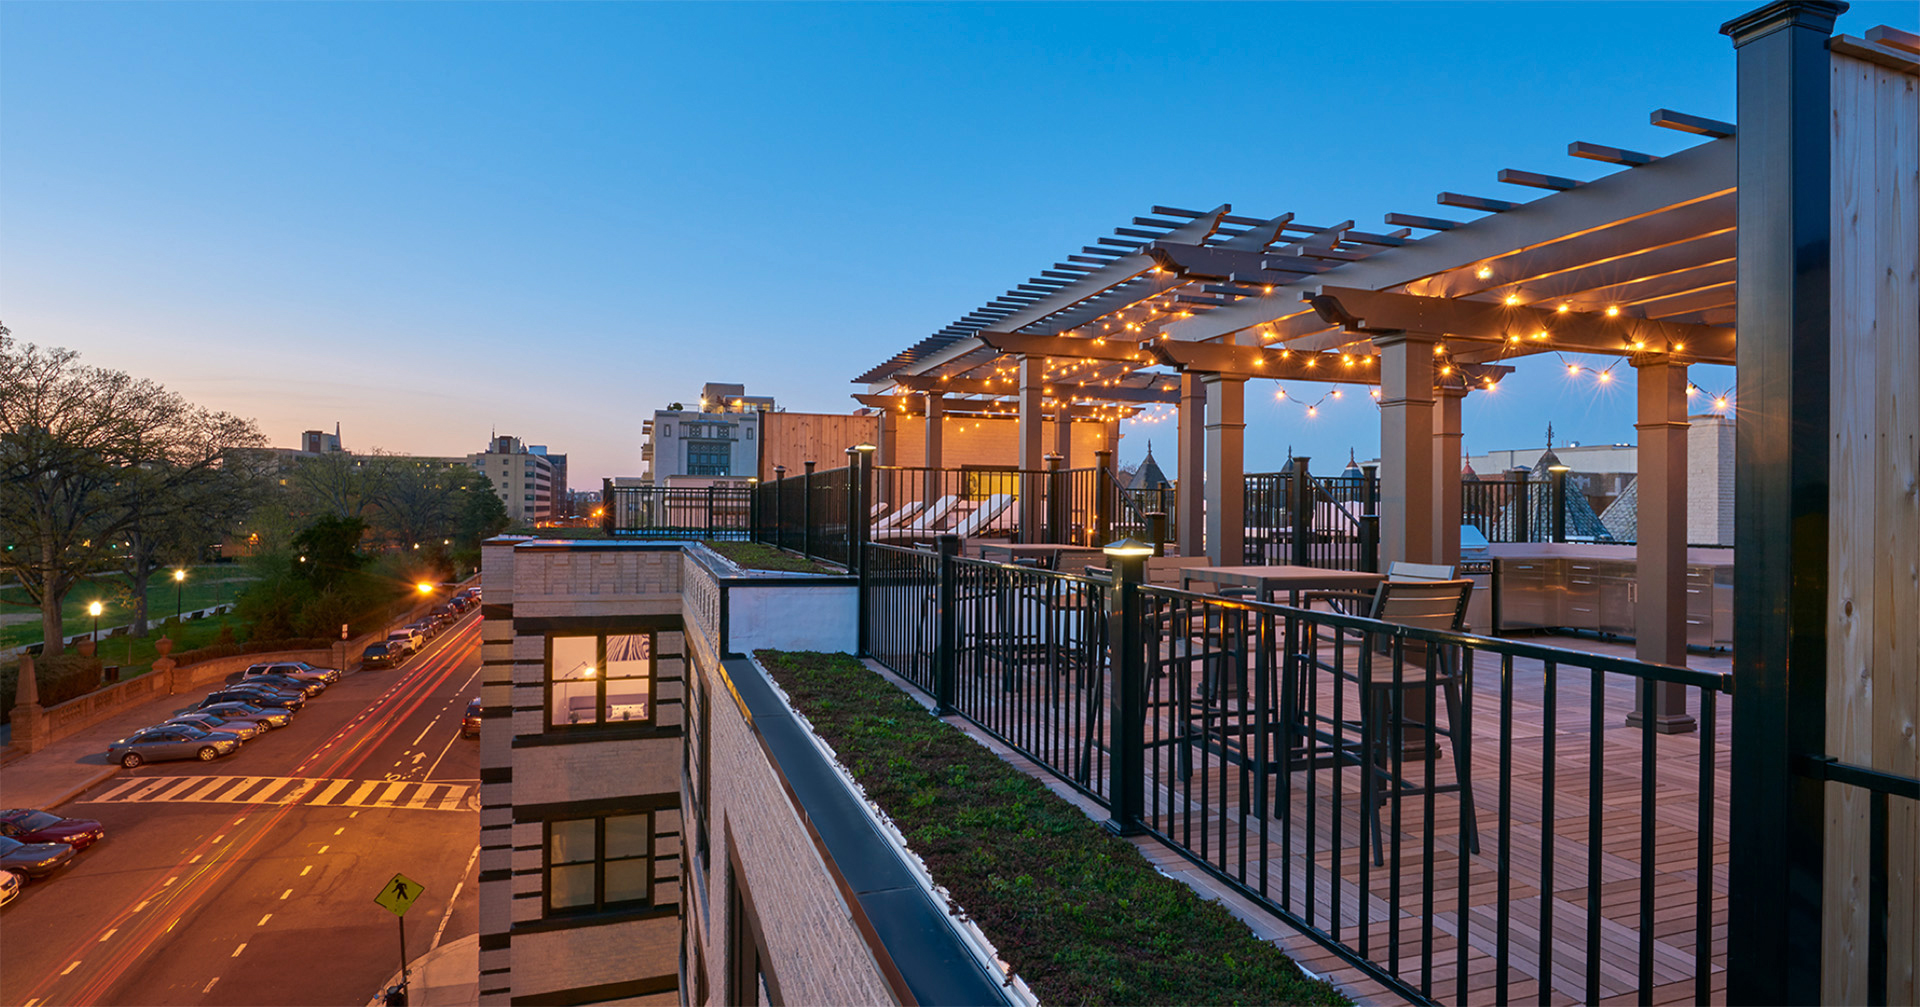 Rooftop deck at sunset with deck railing enclosing the outdoor space containing a pergola lit up with hanging lights.